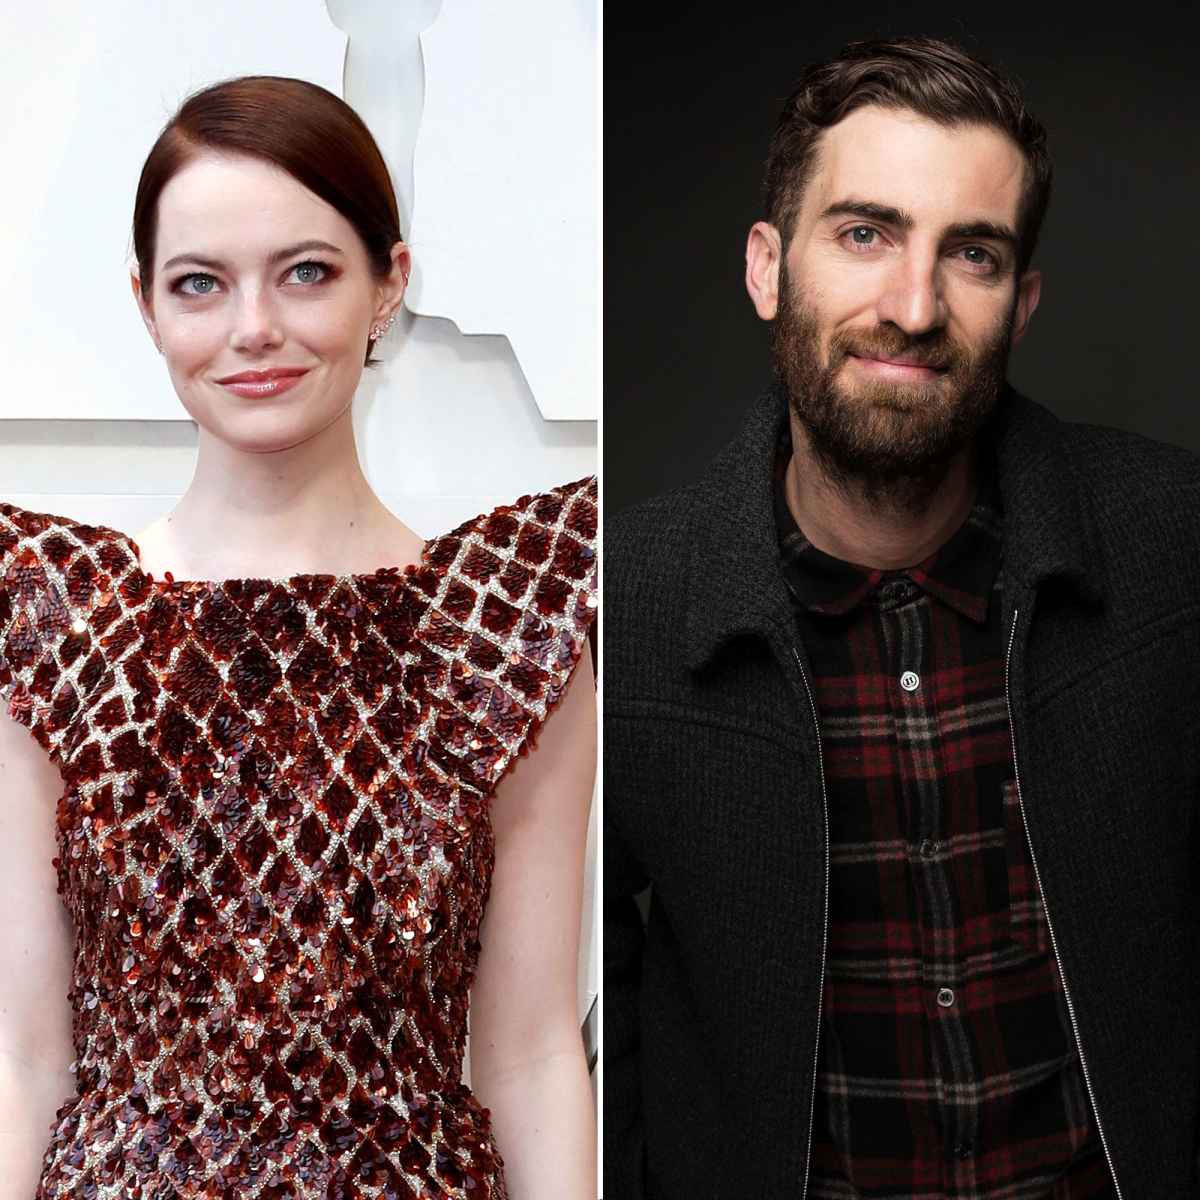 Emma Stone and Husband Dave McCary Welcome First Baby